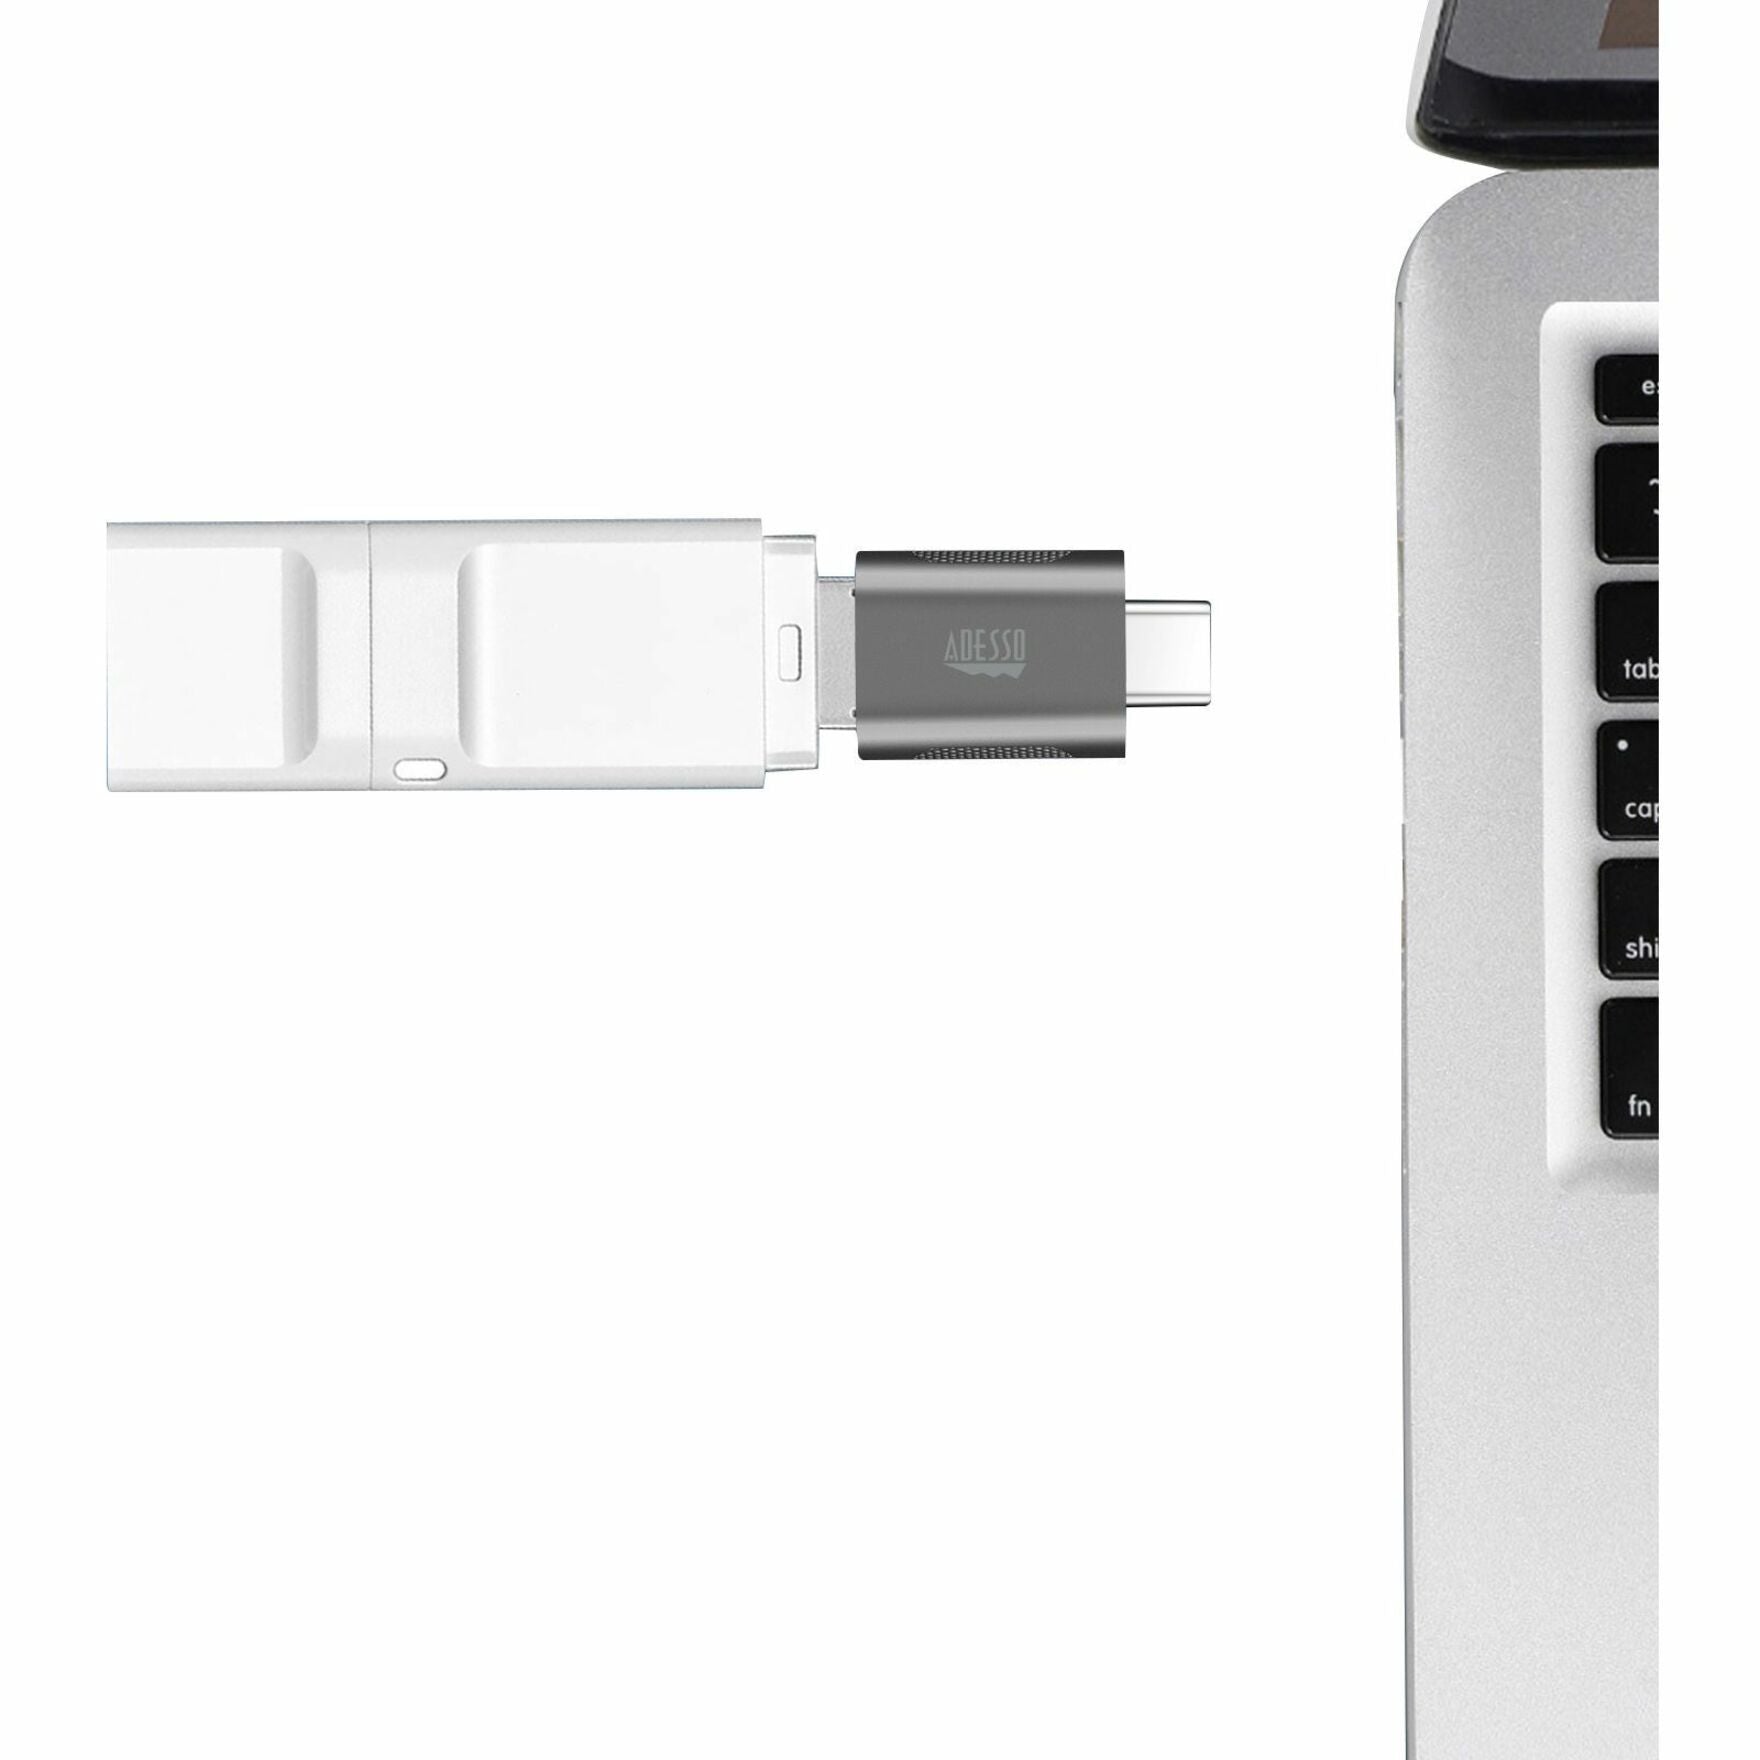 Adesso ADP-300-4 Female USB-A to Male USB-C Adapters (4 pack), Data Transfer Adapter